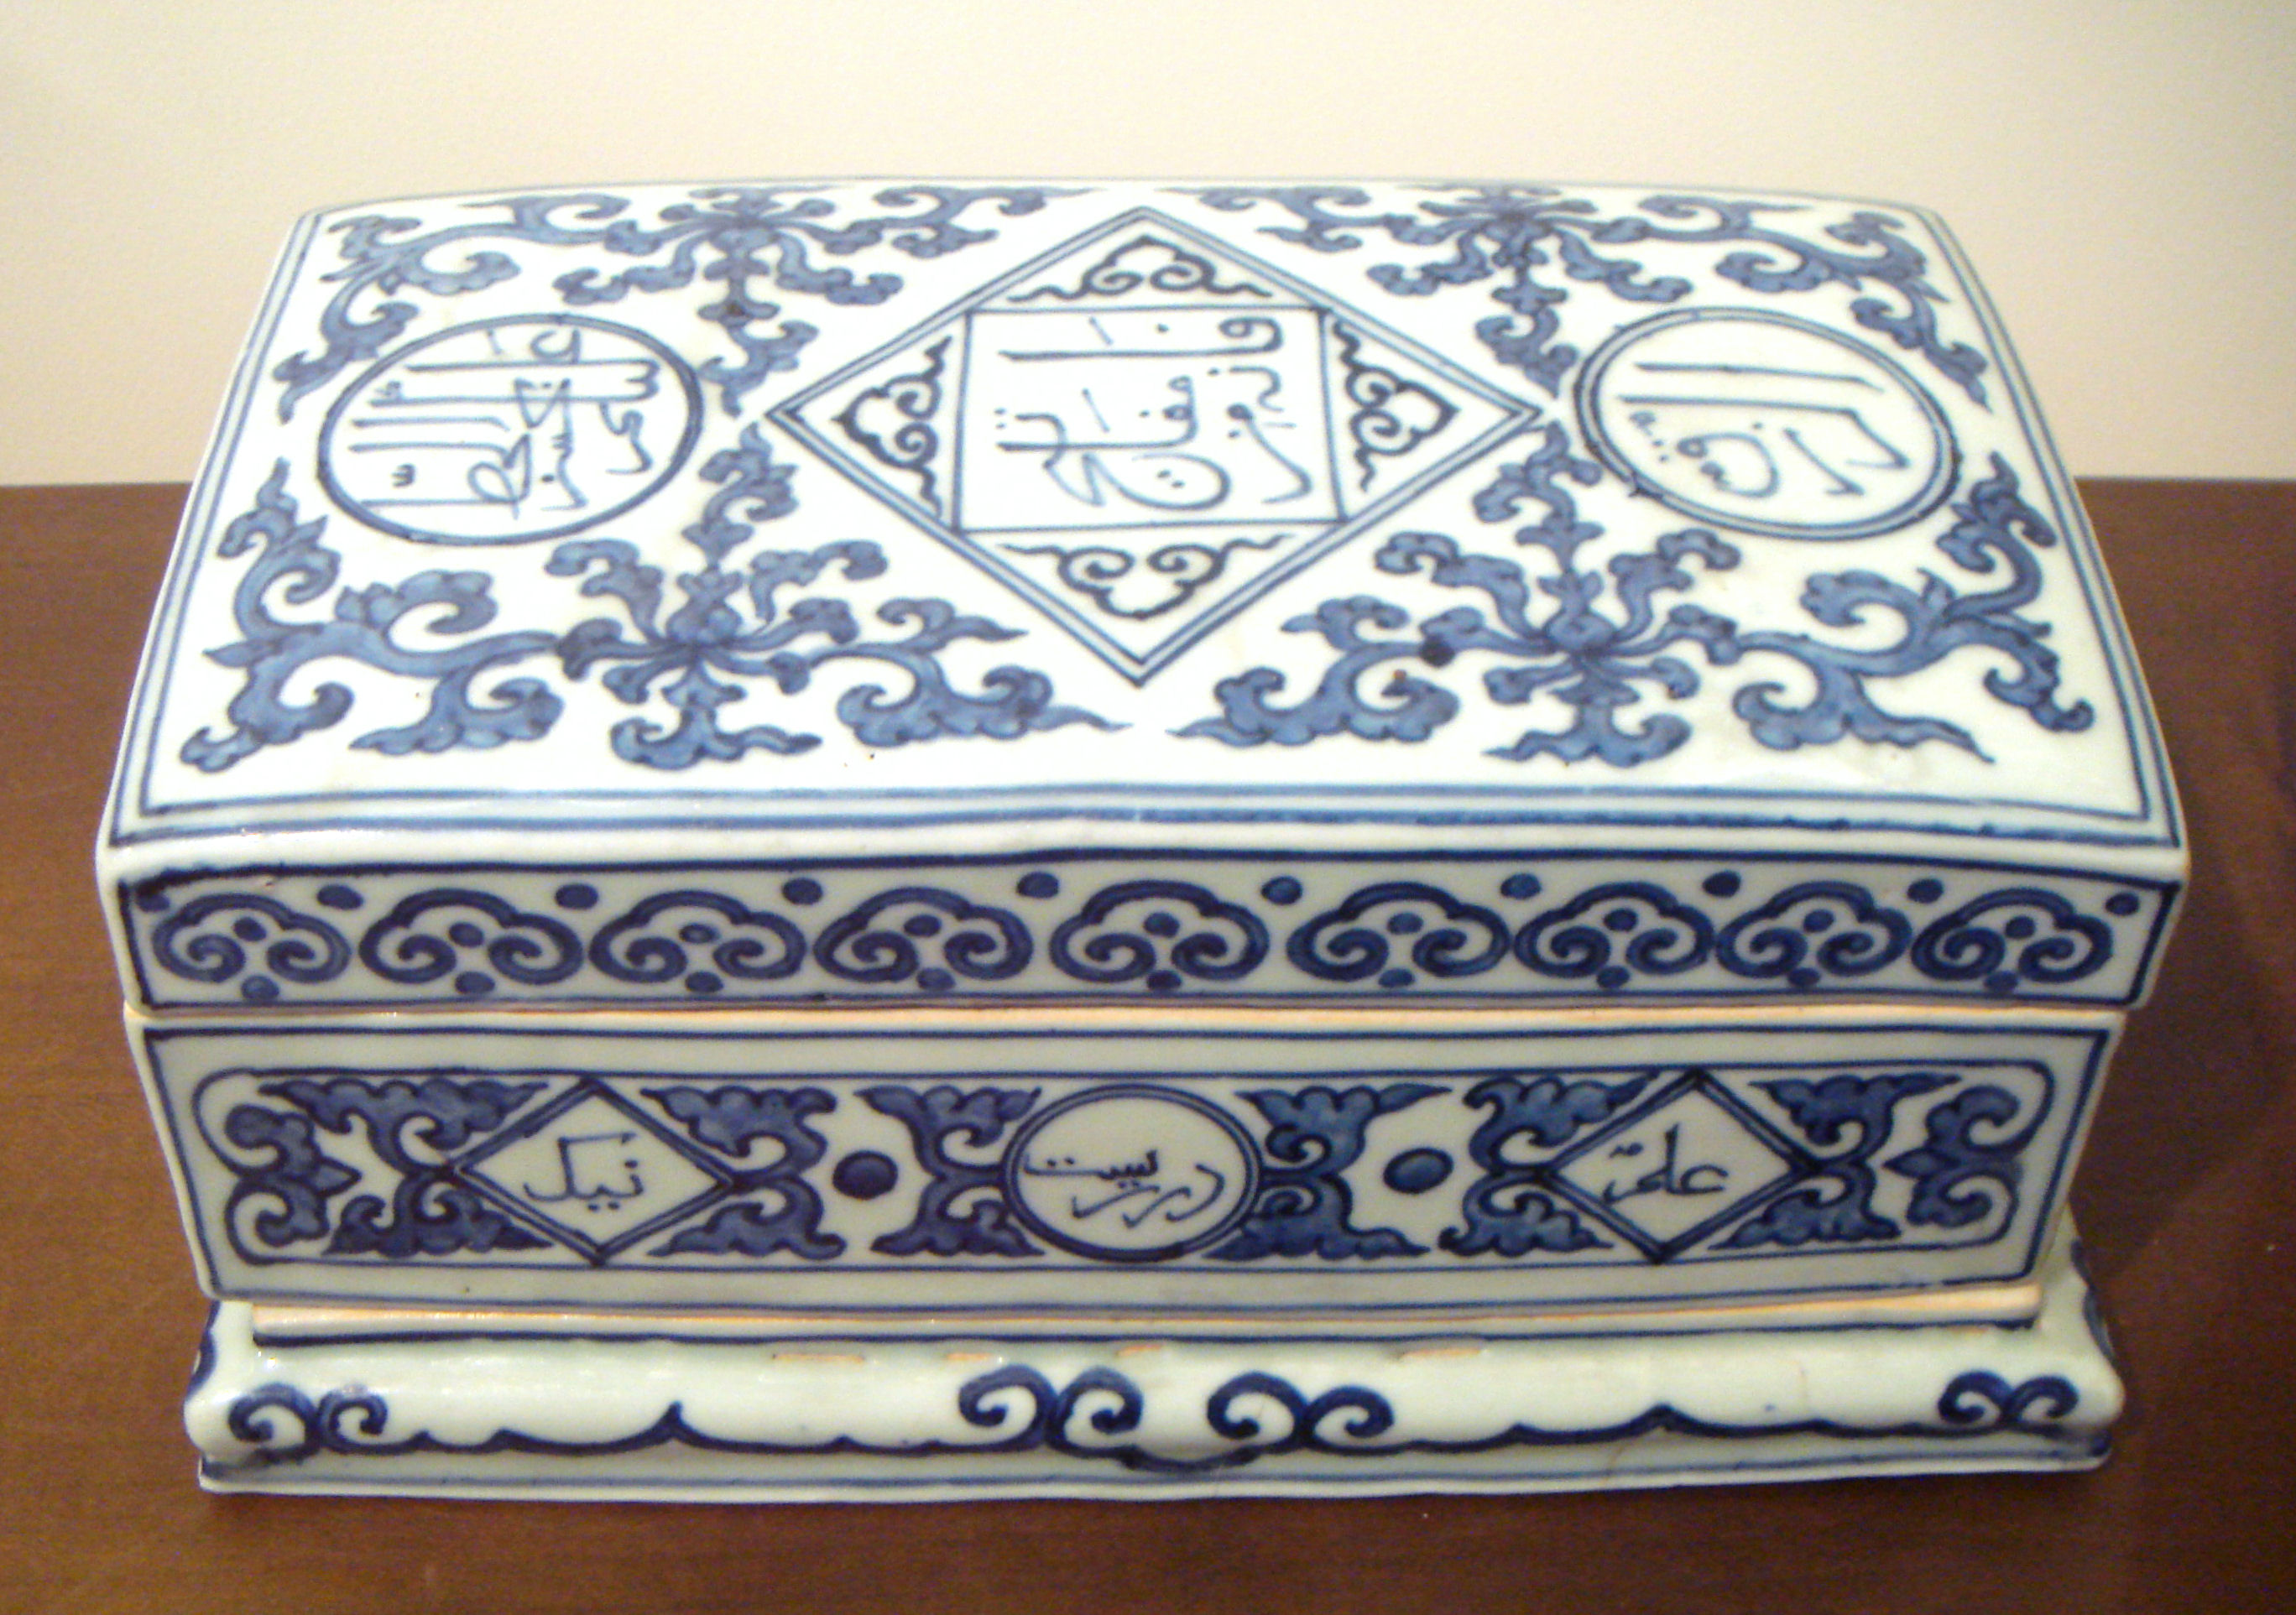 File:Blue and white porcelain box with Arabic and Persian ...